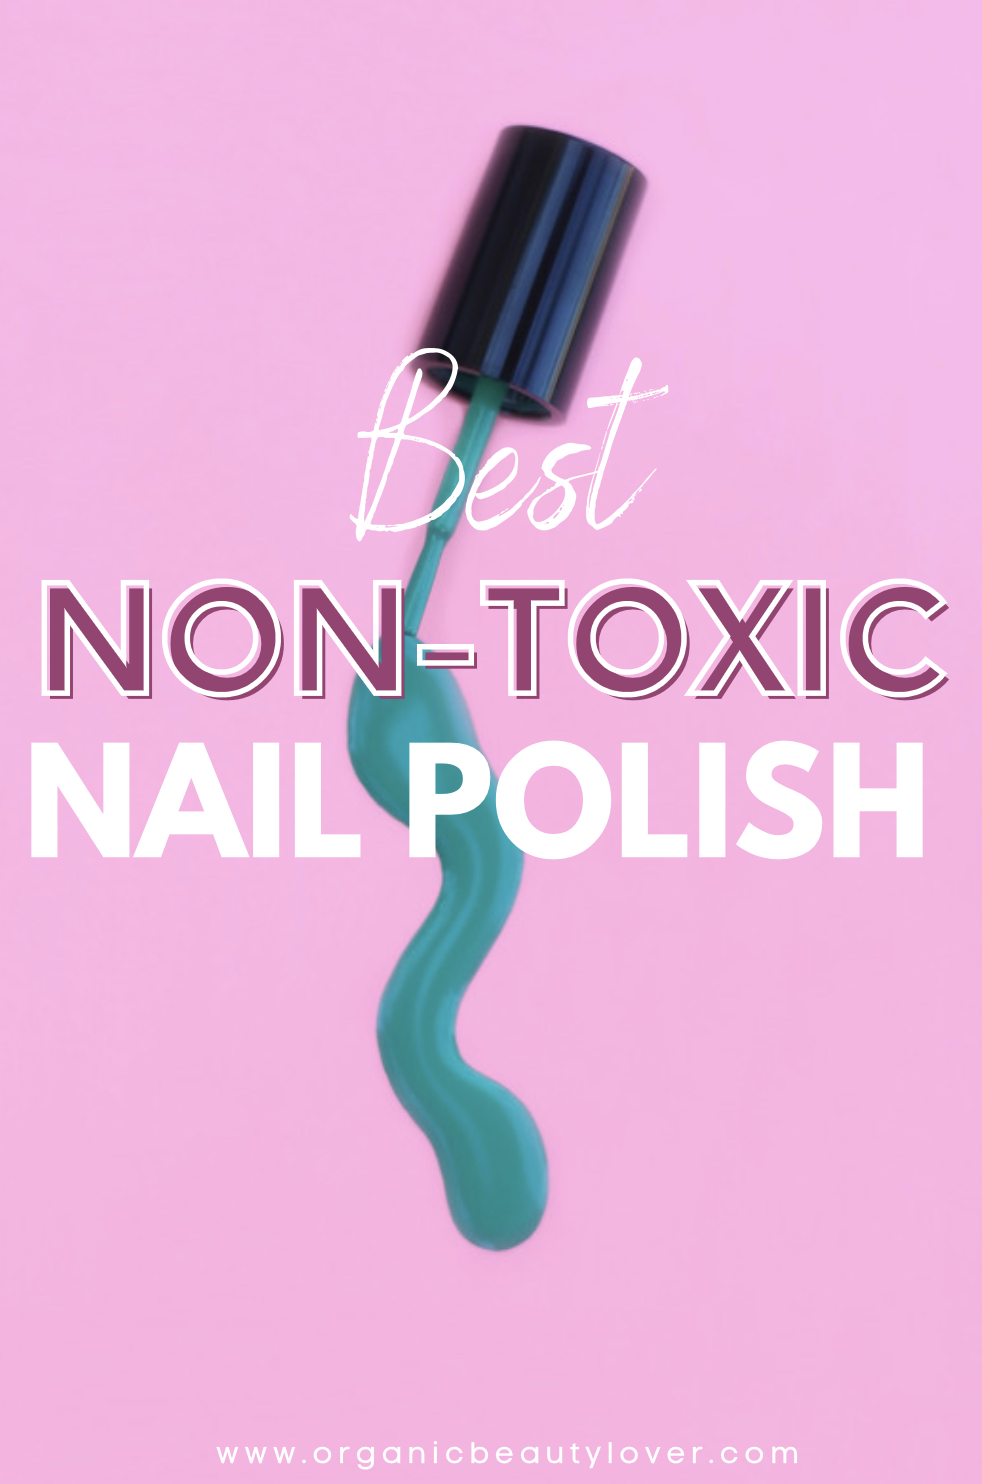 9 Toxin-Free Nail Polish Brands You Need to Know - NewBeauty